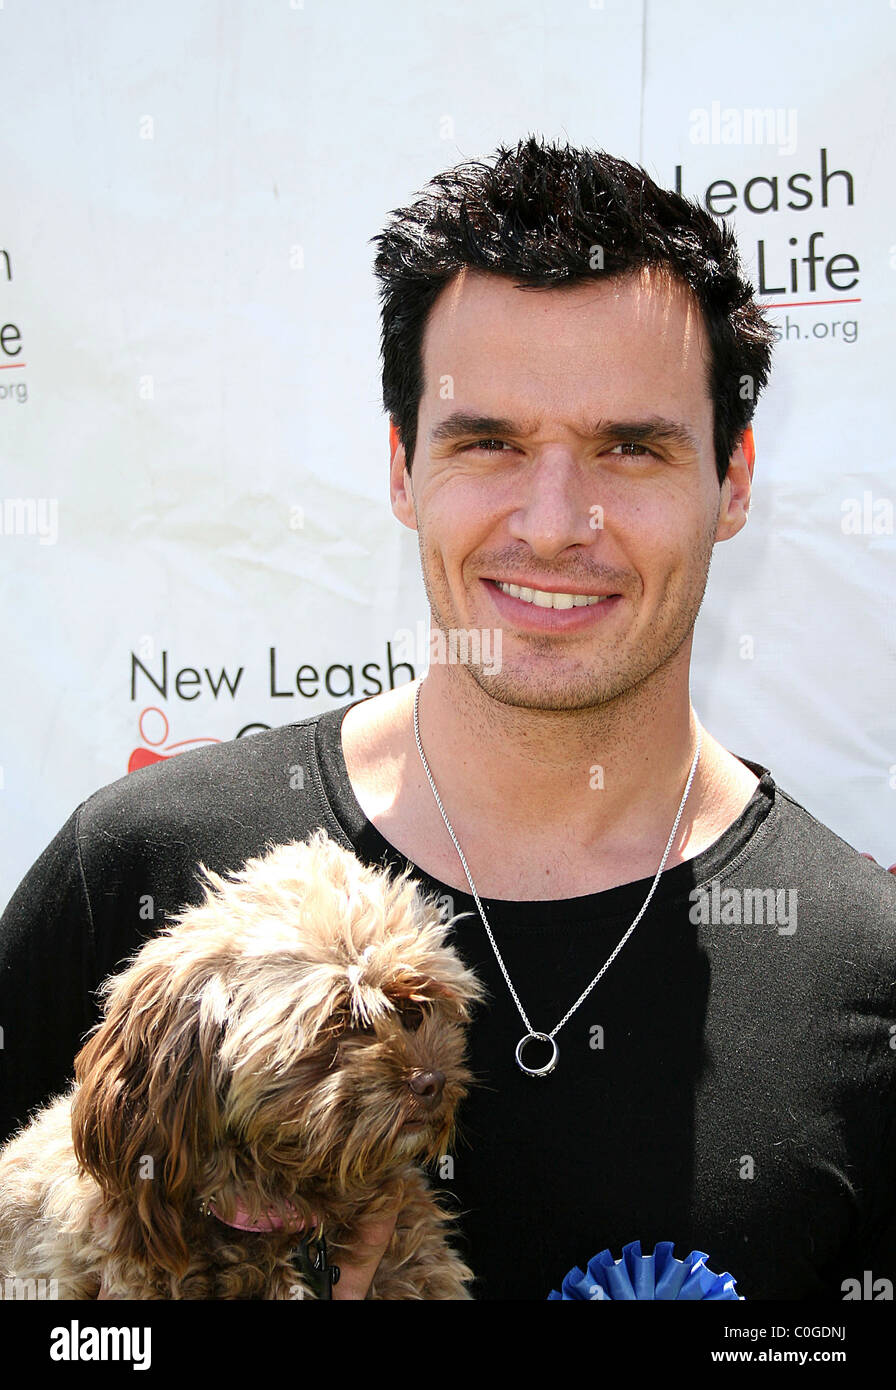 Antonio Sabato at the 7th annual Nuts for Mutts Dog Show and Pet Fair to benefit New Leash on Life Los Angeles, California - Stock Photo